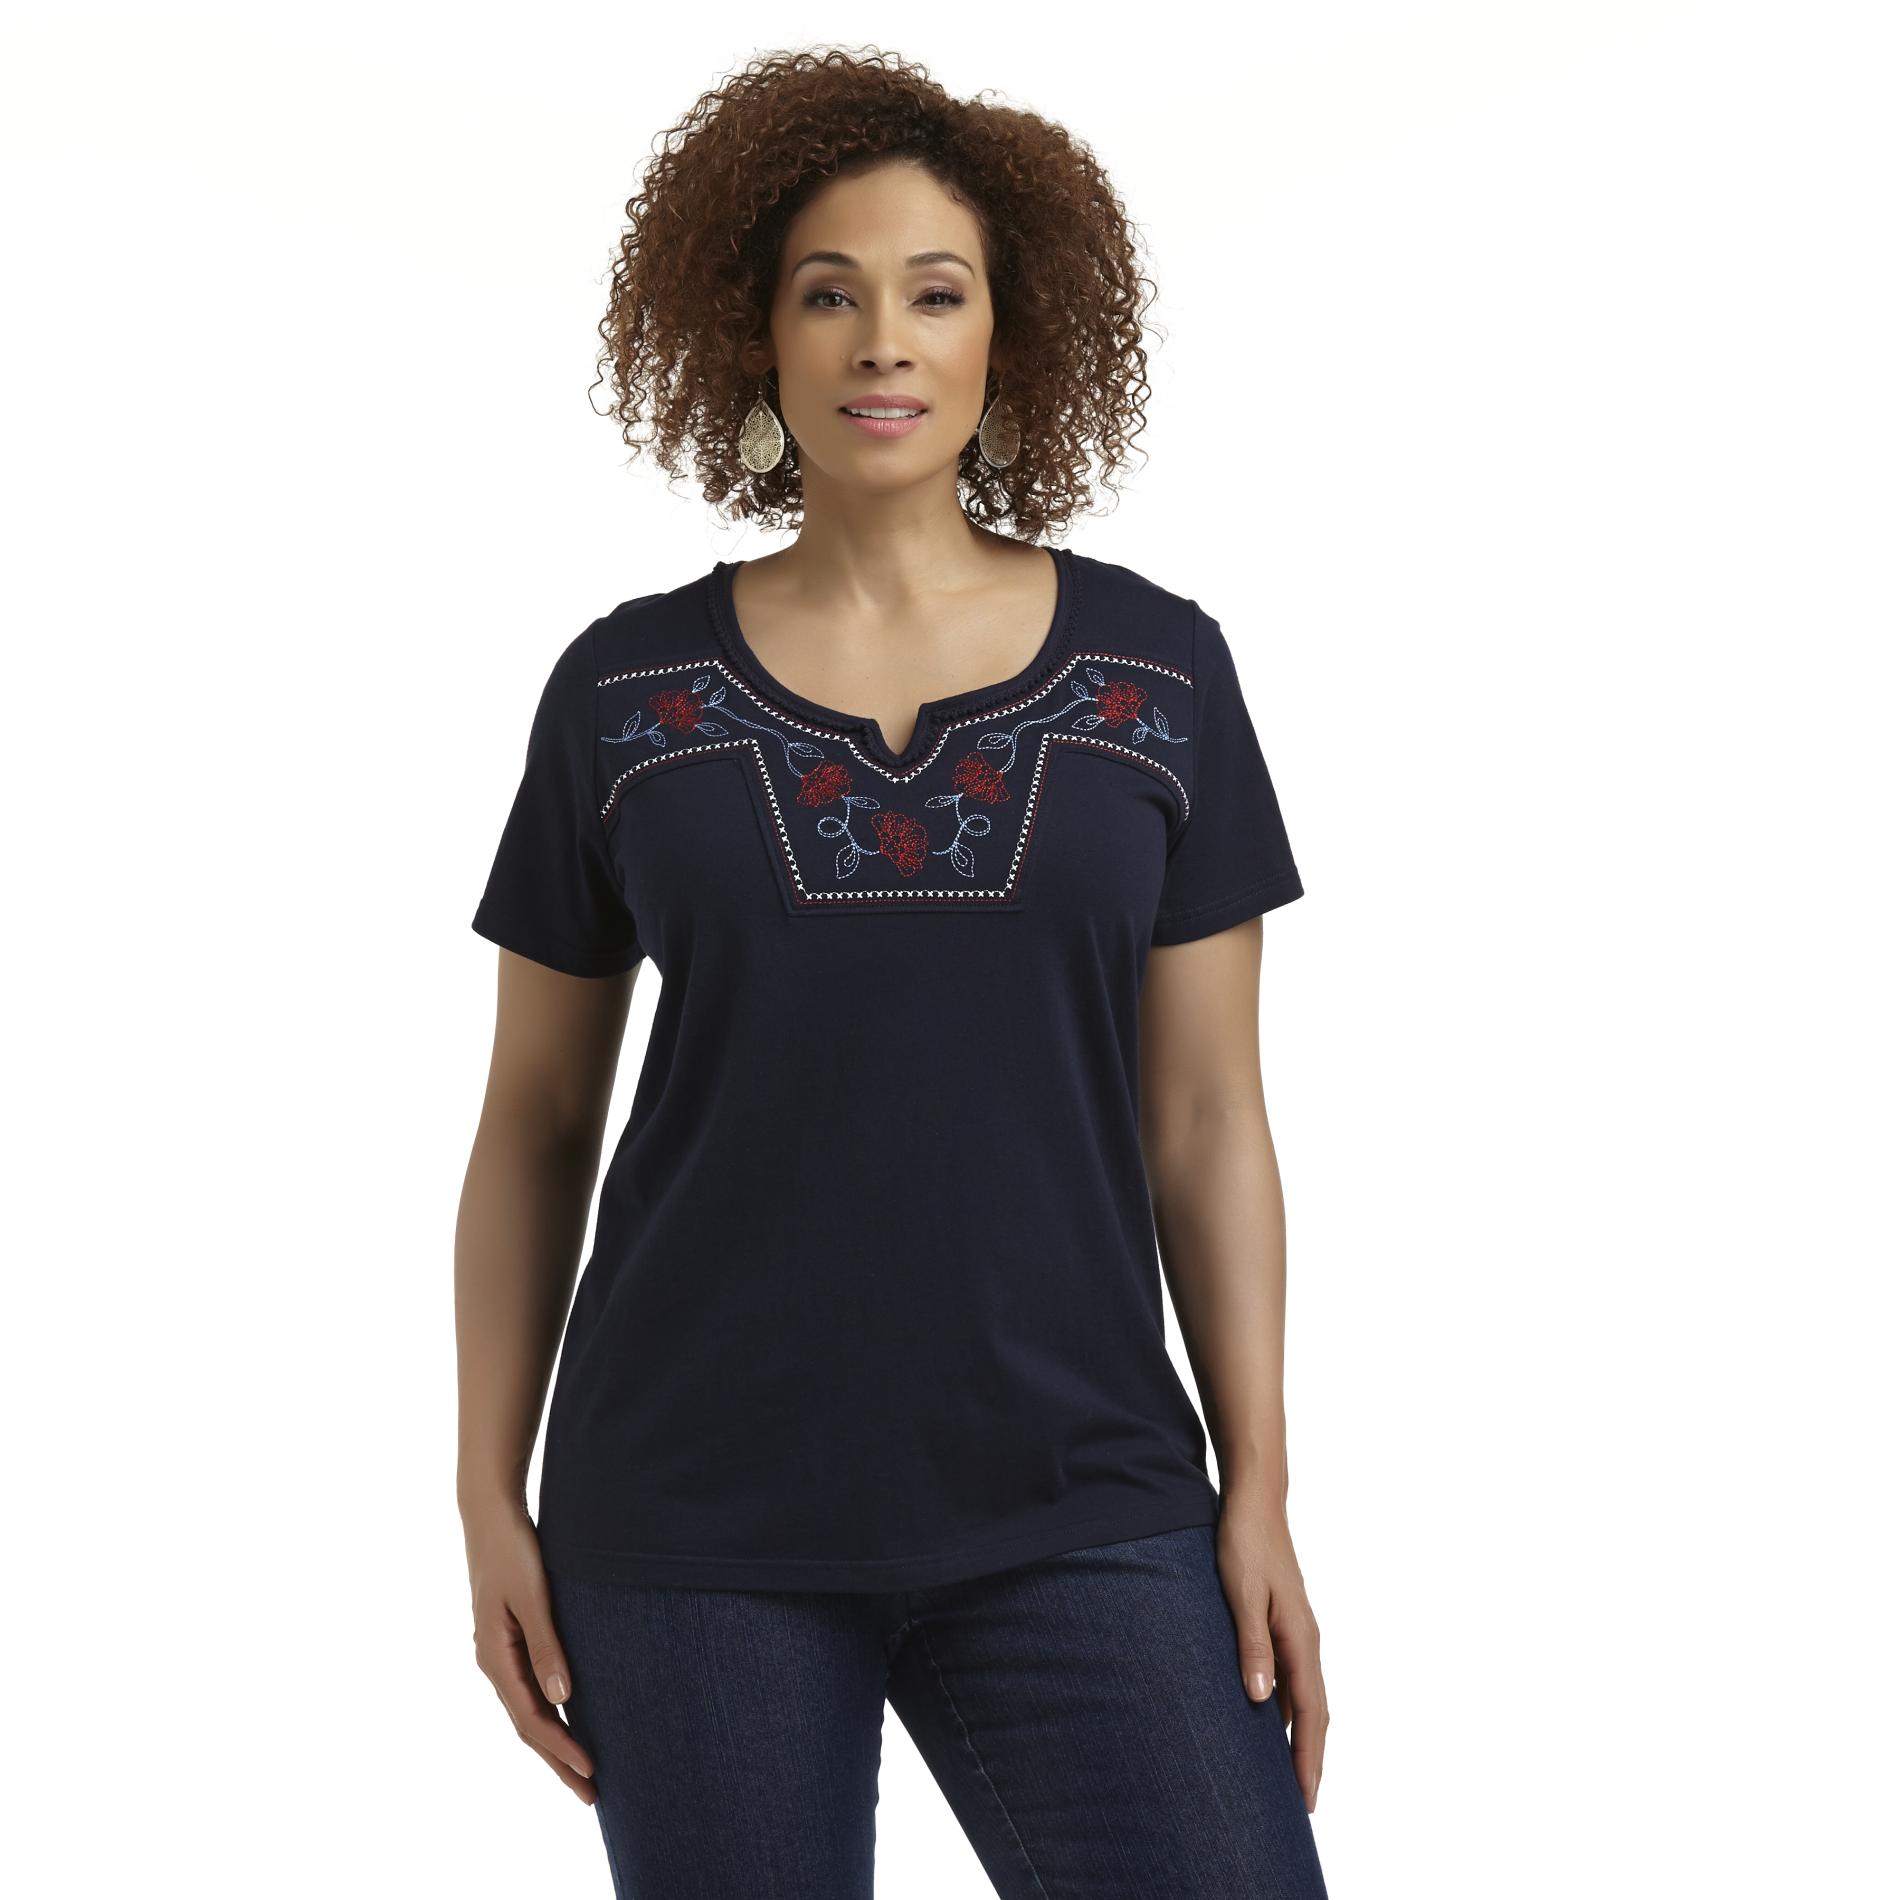 Basic Editions Women's Plus Split-Neck Top - Floral Embroidery